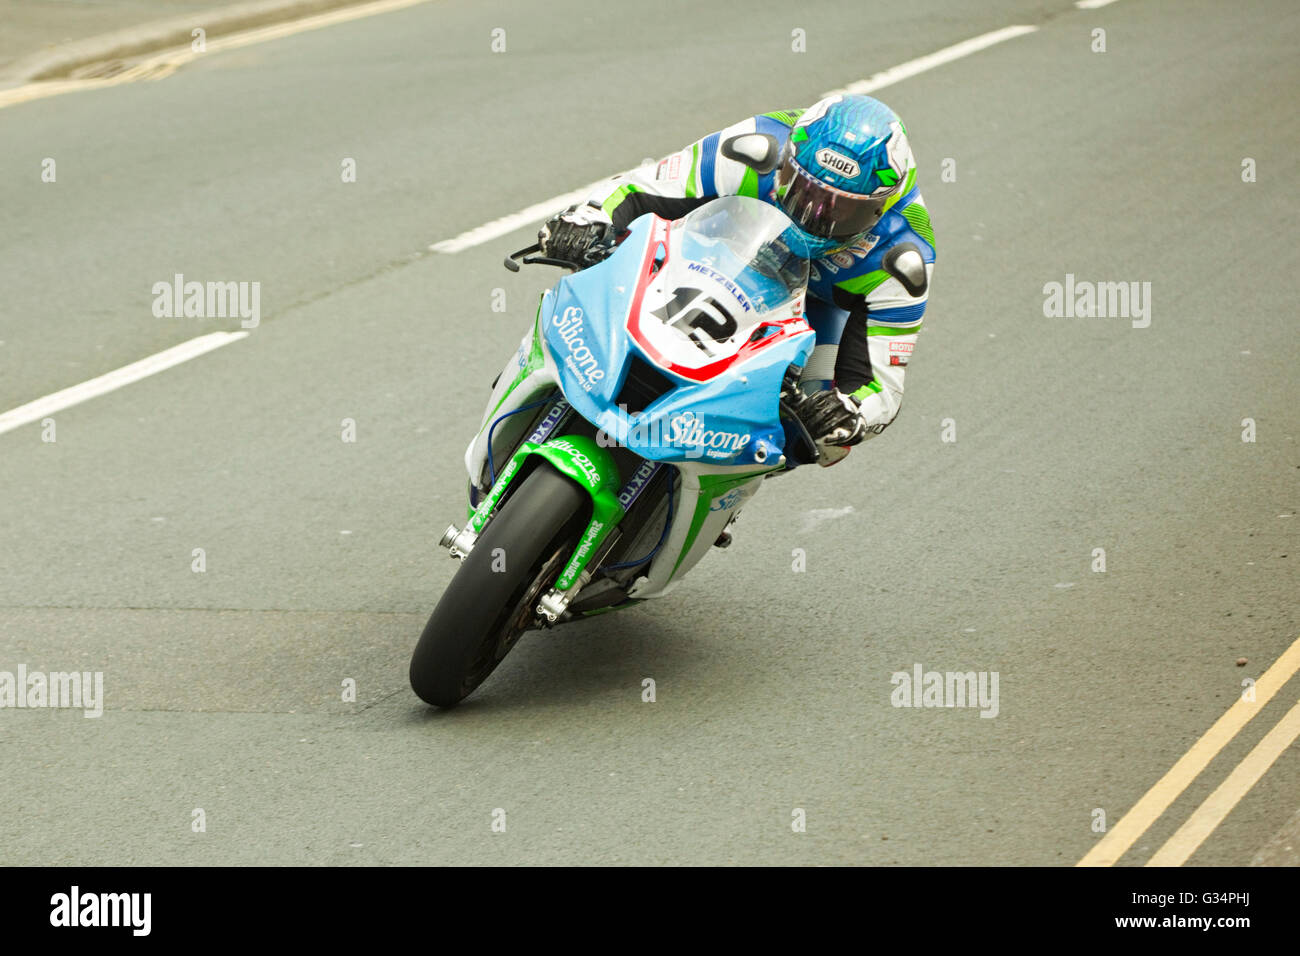 Isle of Man TT race 2016 Kawasaki Superbike motorbike number 12 ridden by Dean Harrison, sponsored by Silicone Engineering, on Brae Hill at 180 mph. Saturday 4th June 2016. Stock Photo